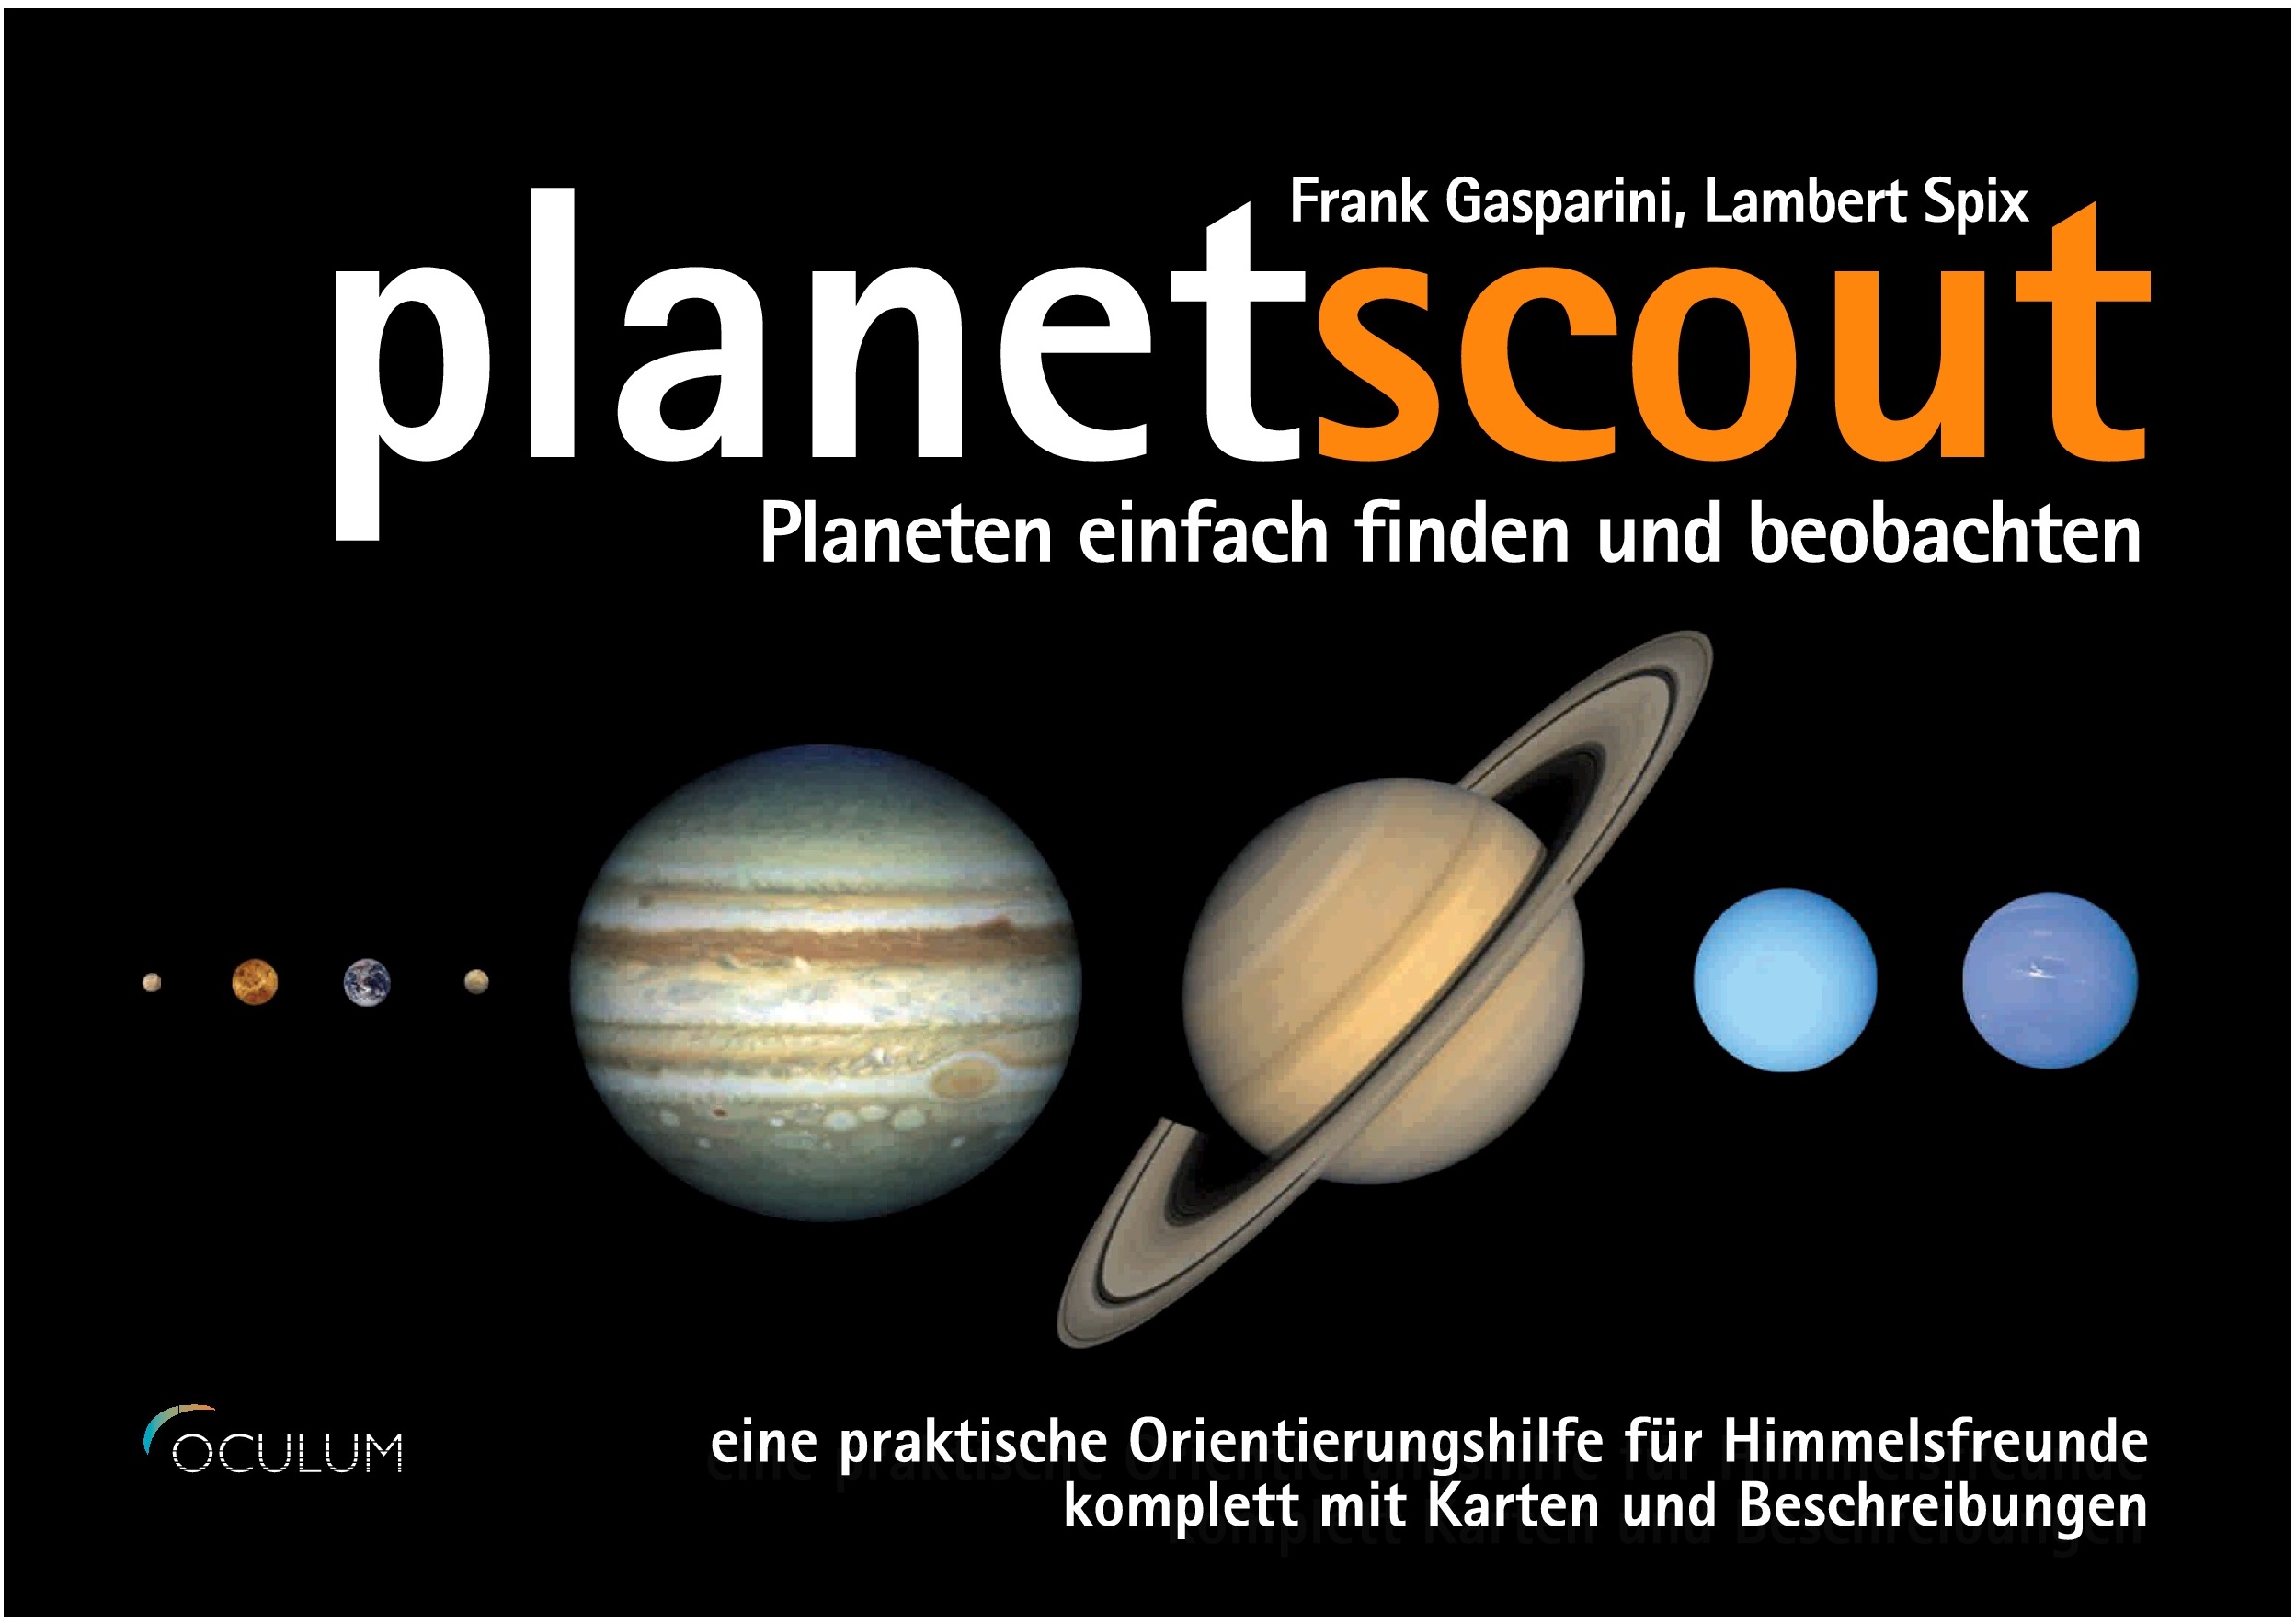 planetscout